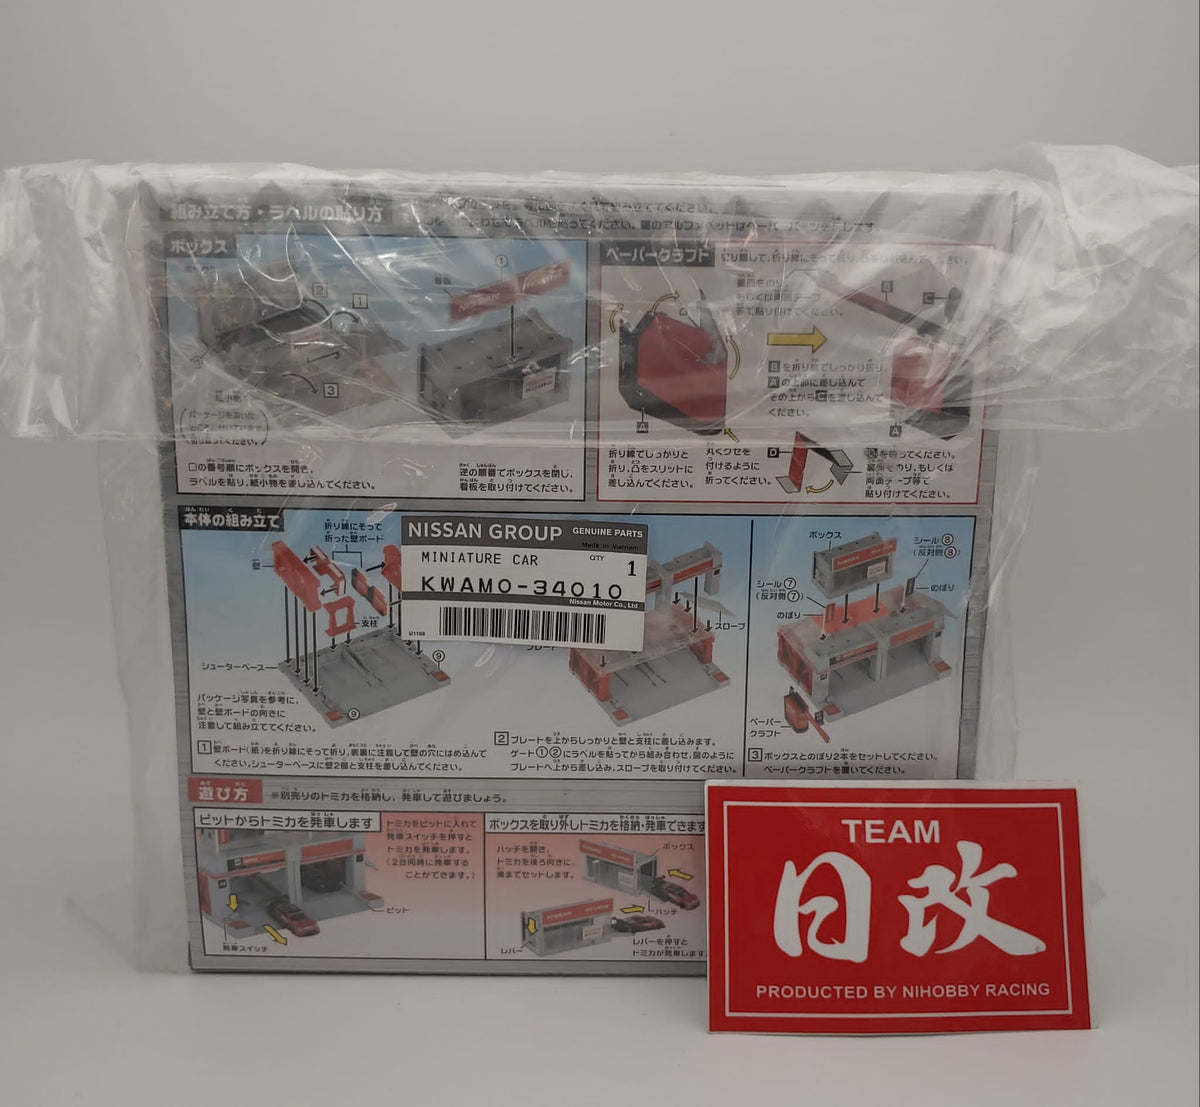 TOMICA NISSAN RACING TEAM NISMO PIT. event limited version